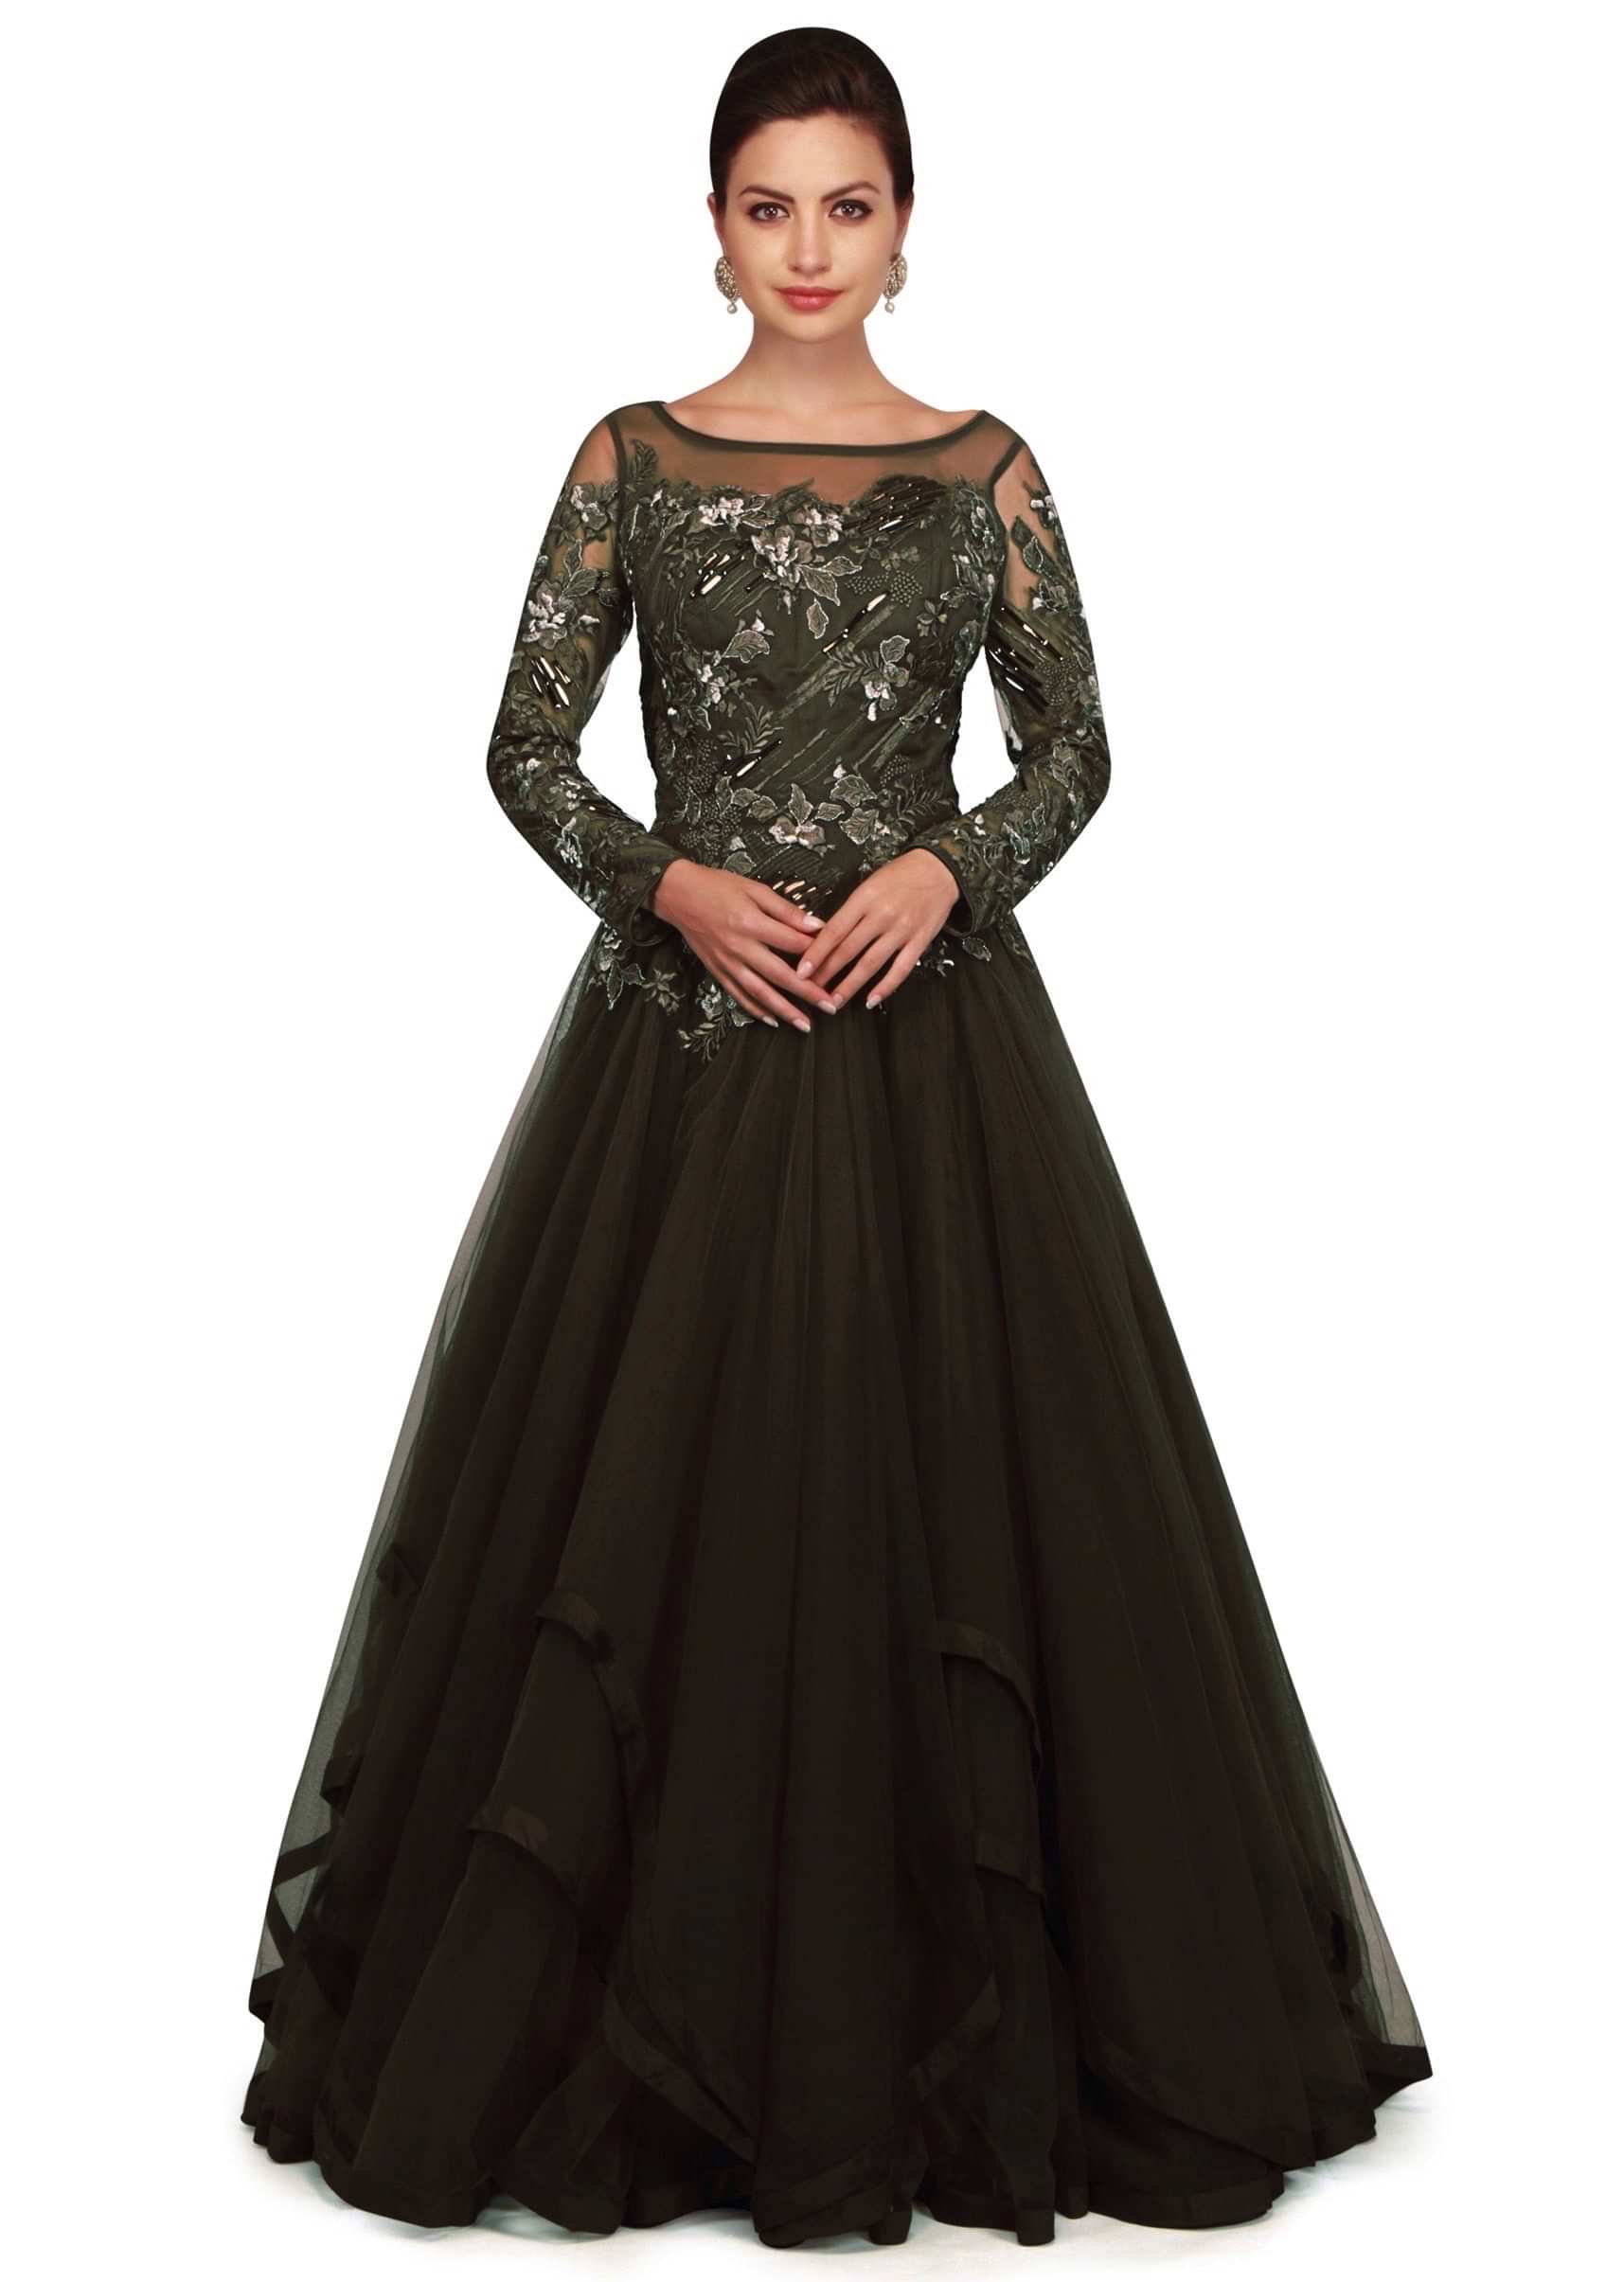 Black Olive Gown With Embroidered Bodice And Fancy Hem Line Online - Kalki Fashion